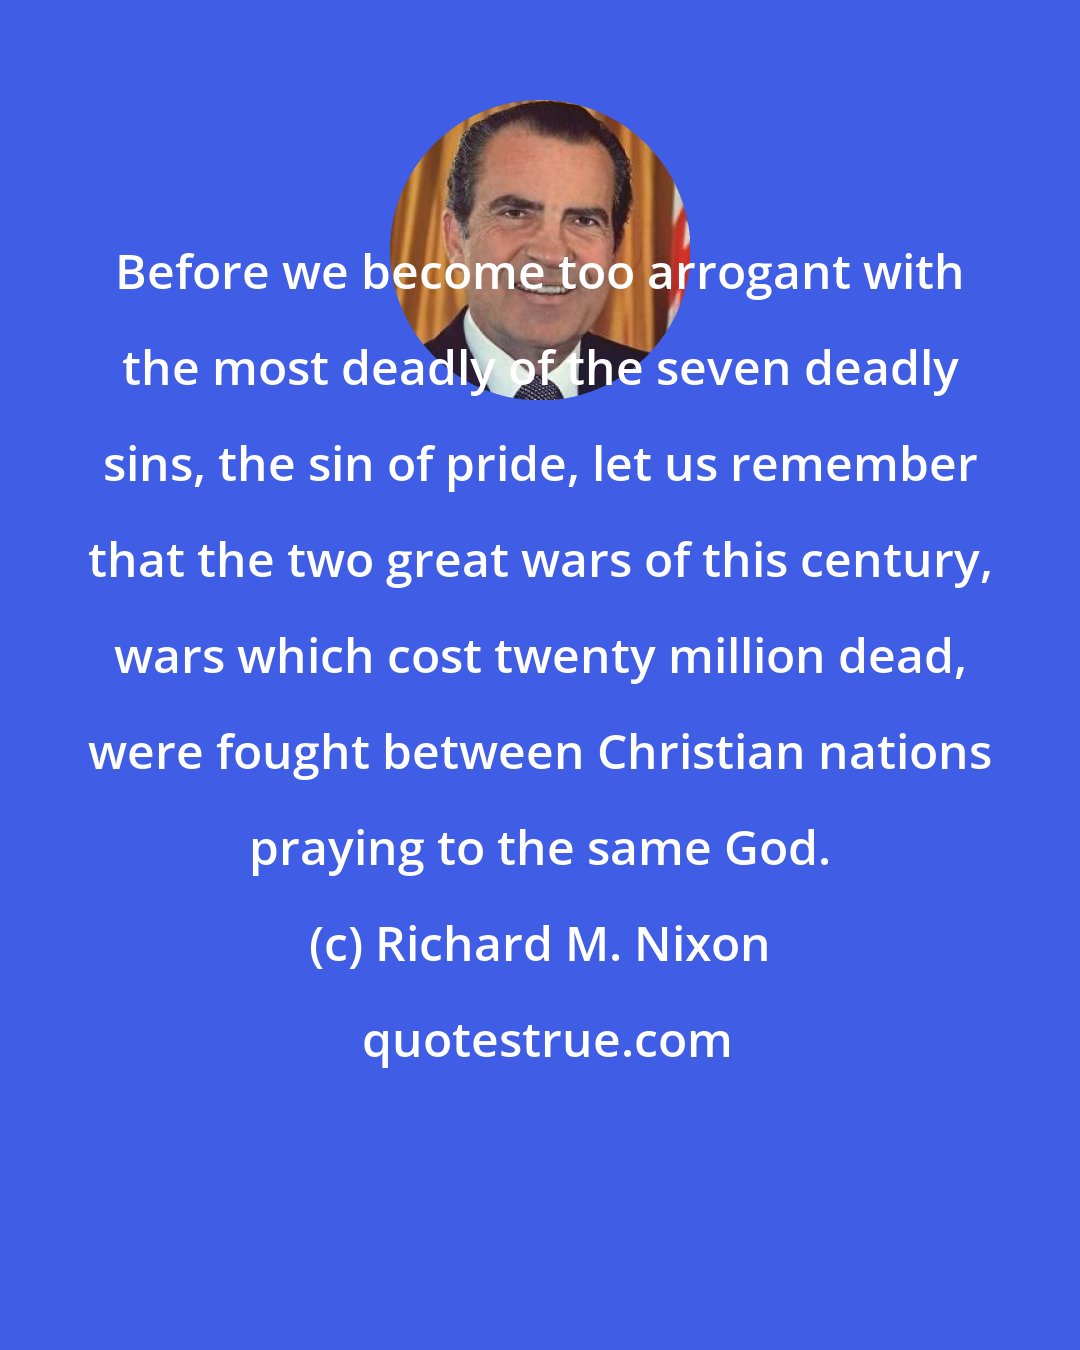 Richard M. Nixon: Before we become too arrogant with the most deadly of the seven deadly sins, the sin of pride, let us remember that the two great wars of this century, wars which cost twenty million dead, were fought between Christian nations praying to the same God.